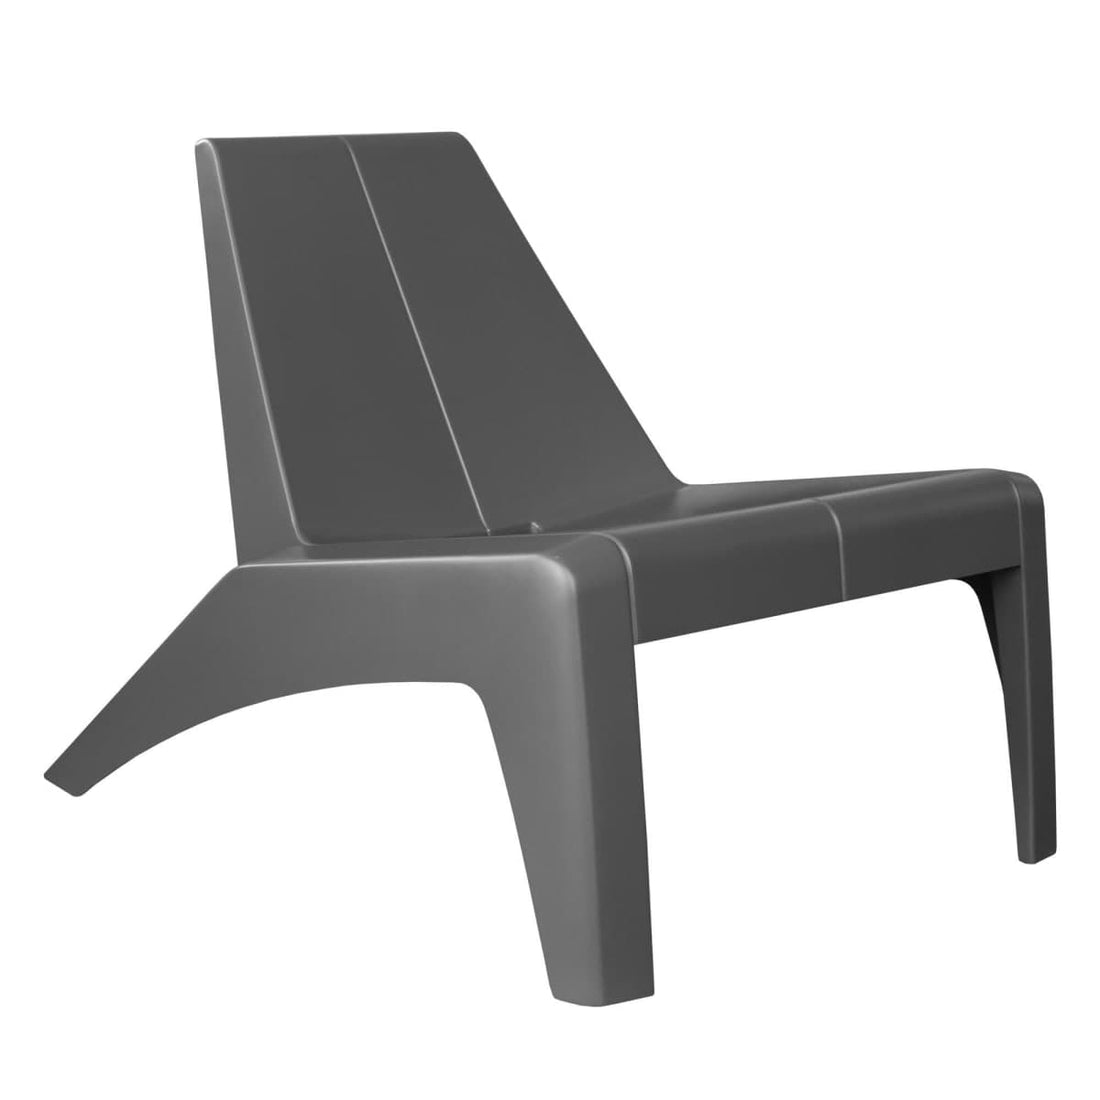 HALIOS RELAX NATERIAL ANTHRACITE ARMCHAIR - best price from Maltashopper.com BR500015324